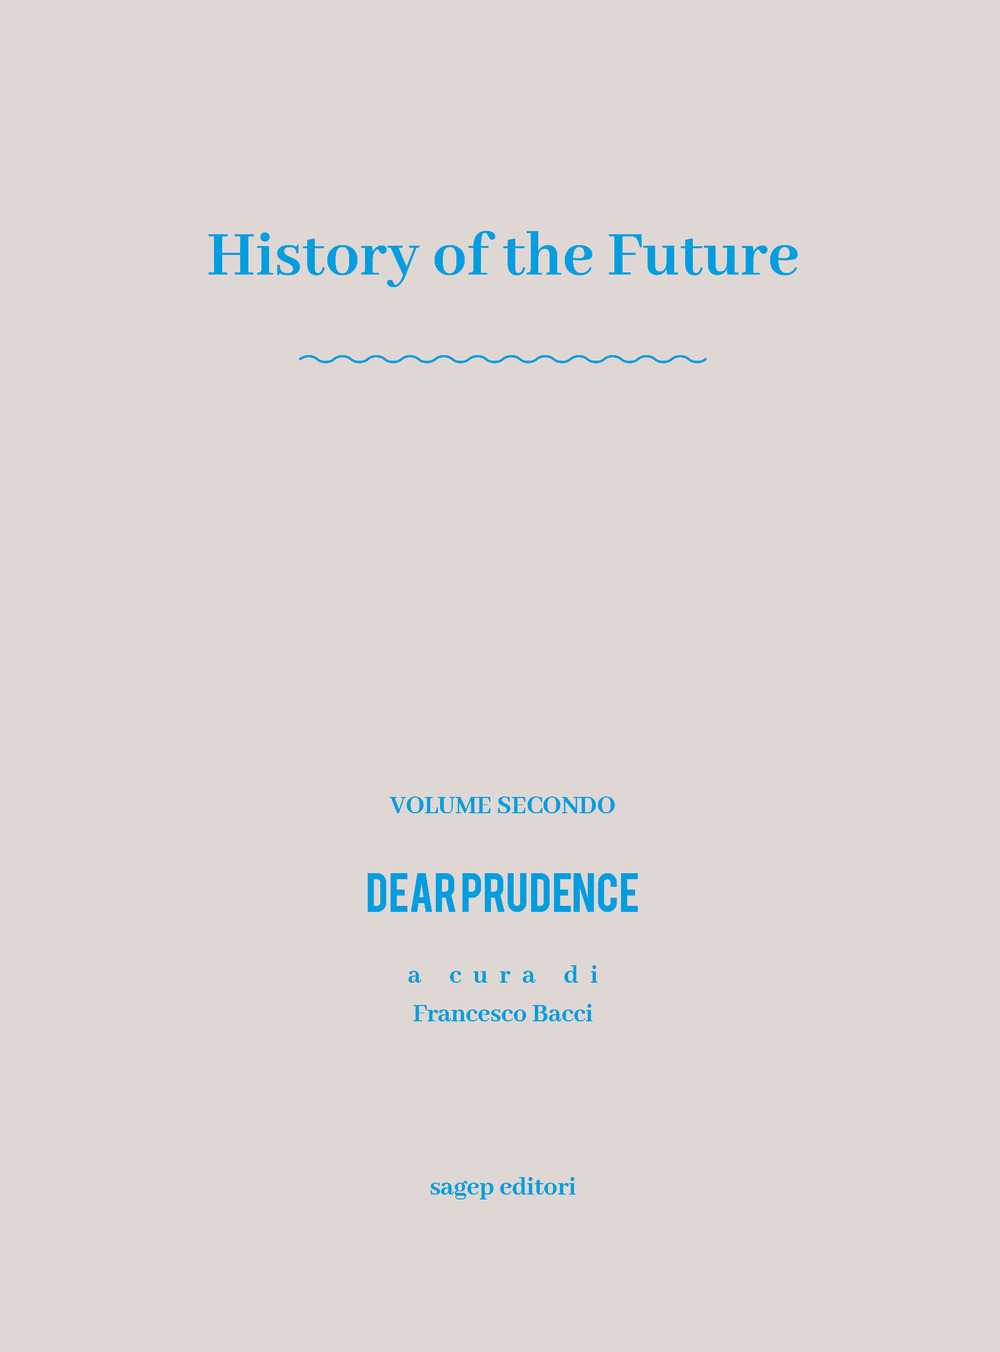 History of the future. Vol. 2: Dear prudence